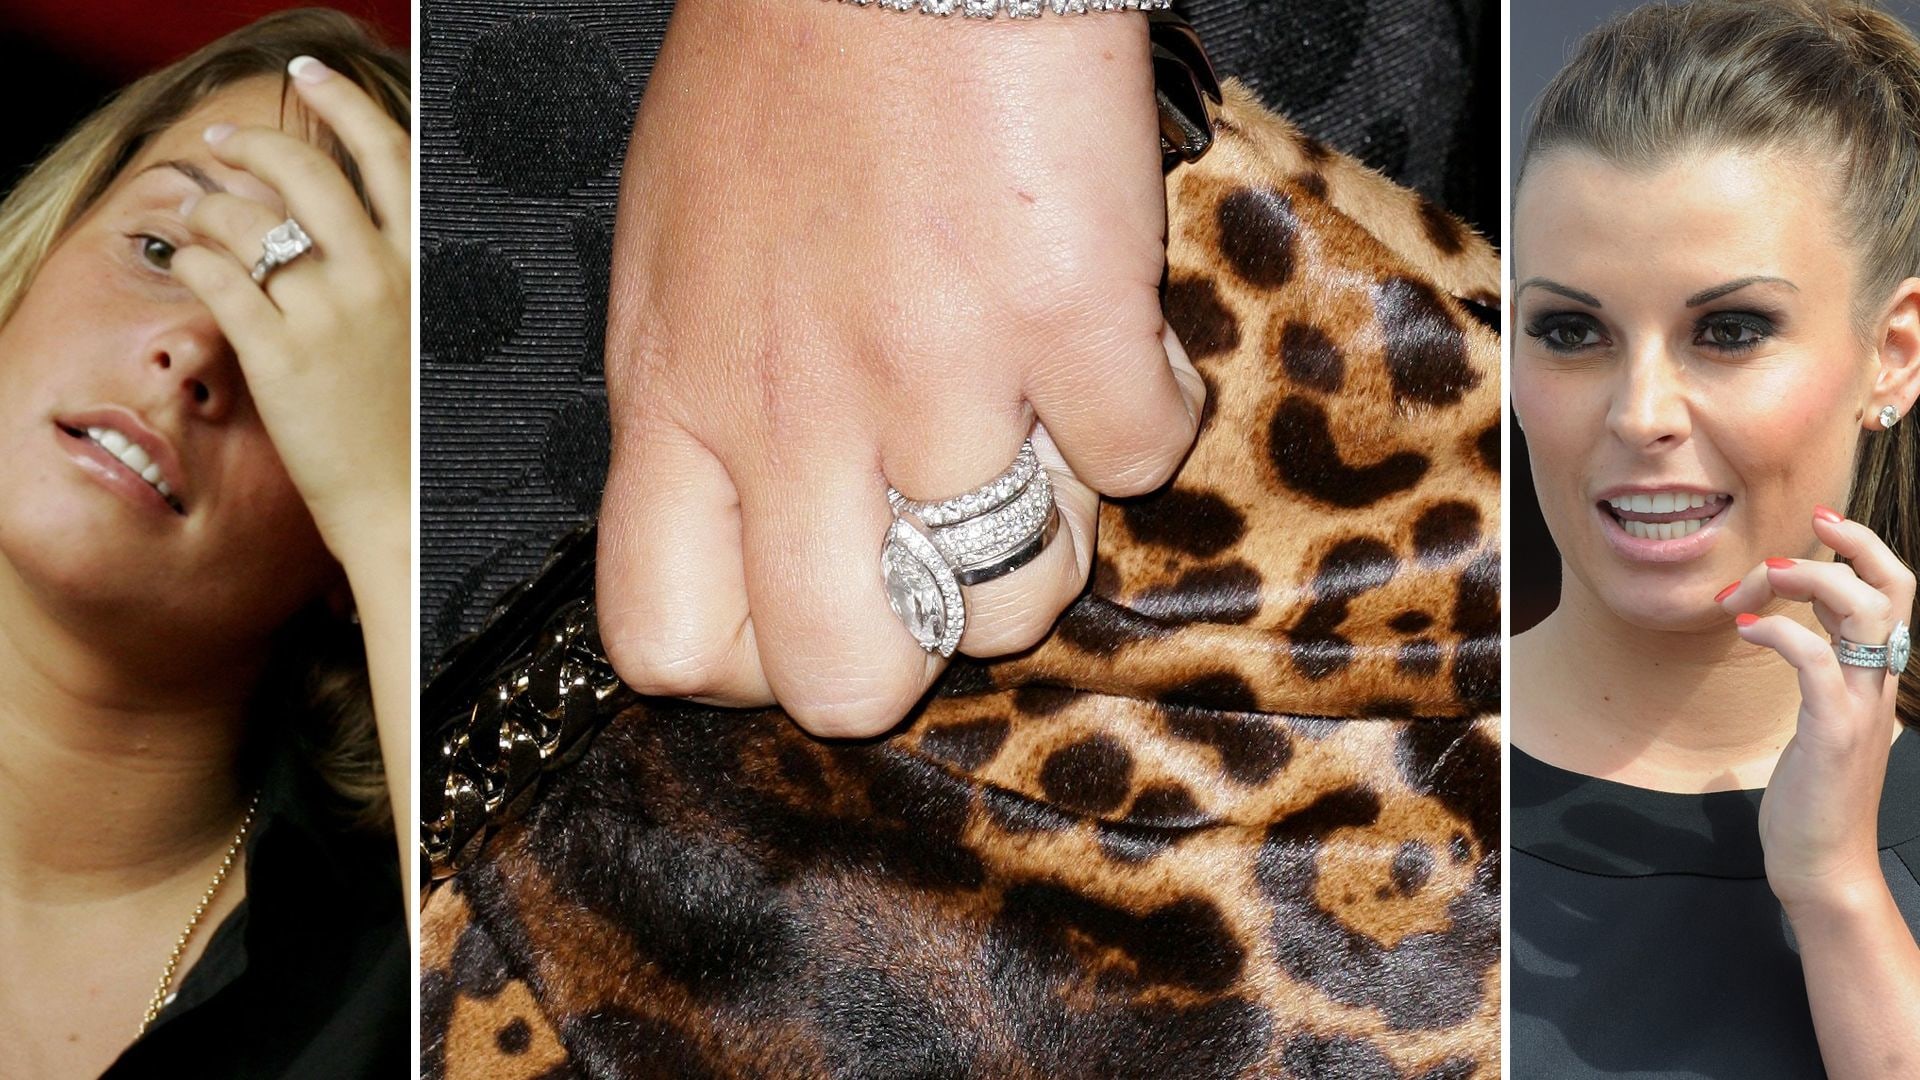 Coleen Rooney's engagement rings